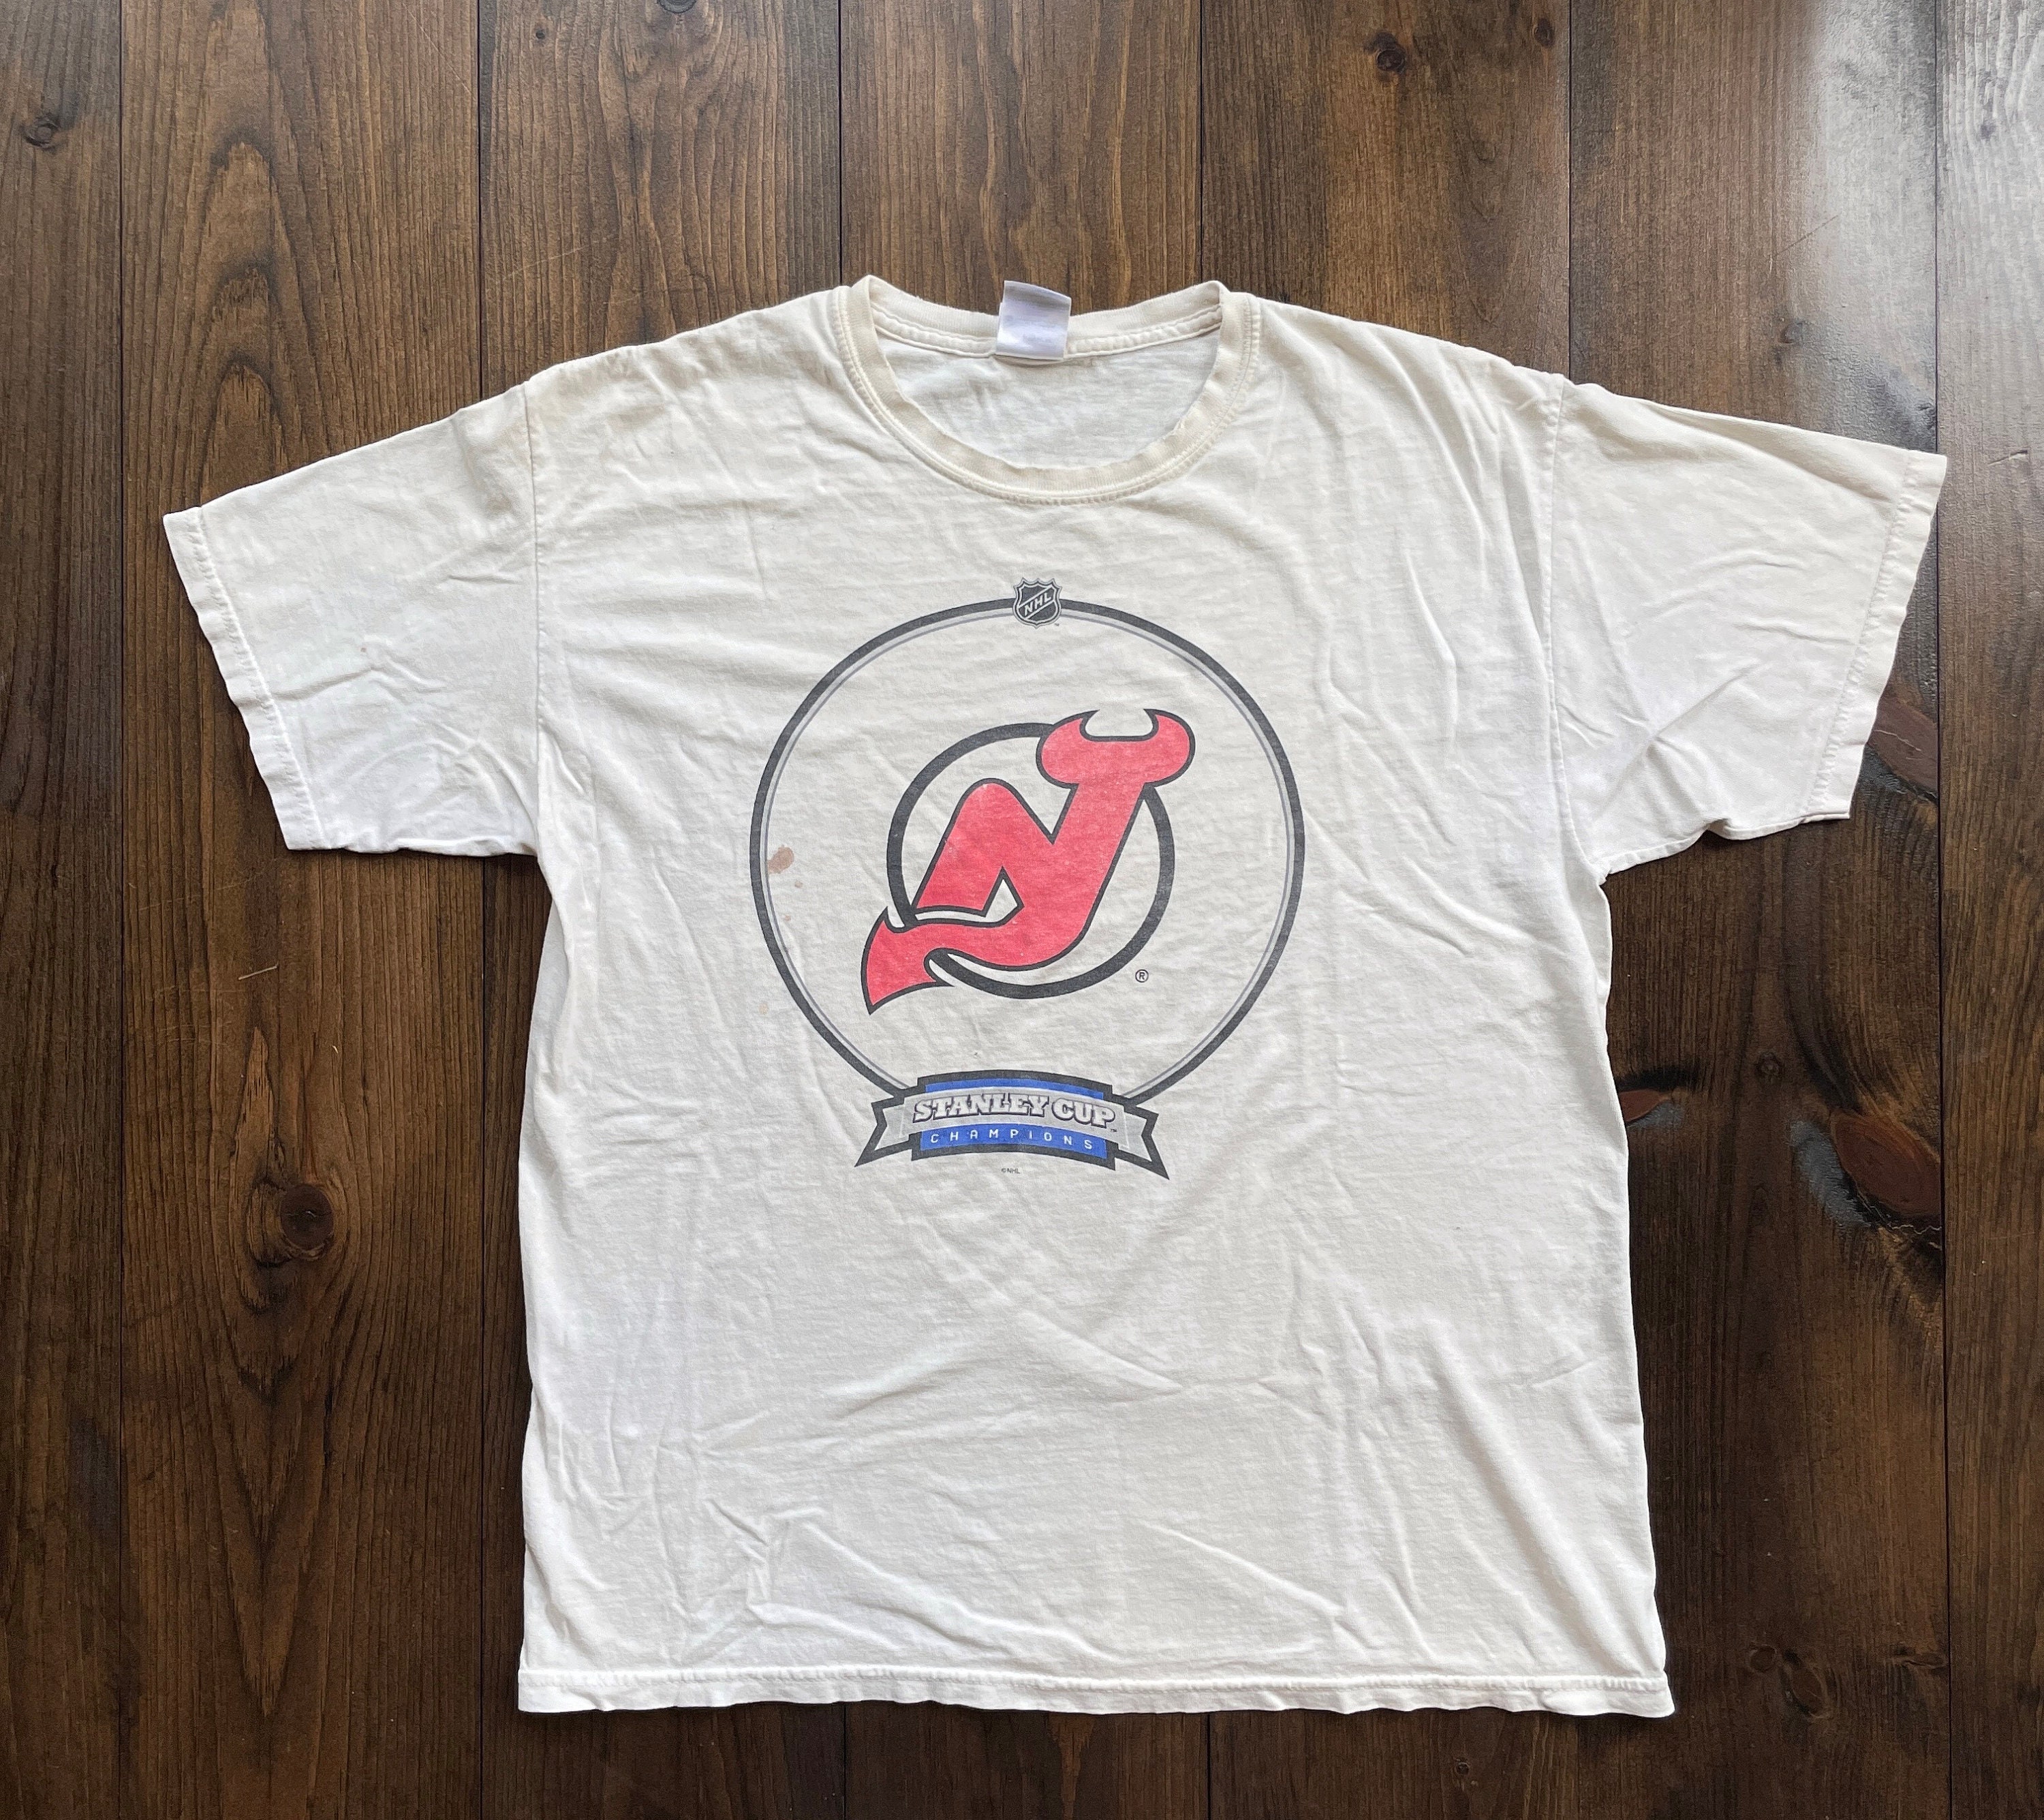 NHL New Jersey Devils 2000 Stanley Cup Champions TShirt Size M NOS